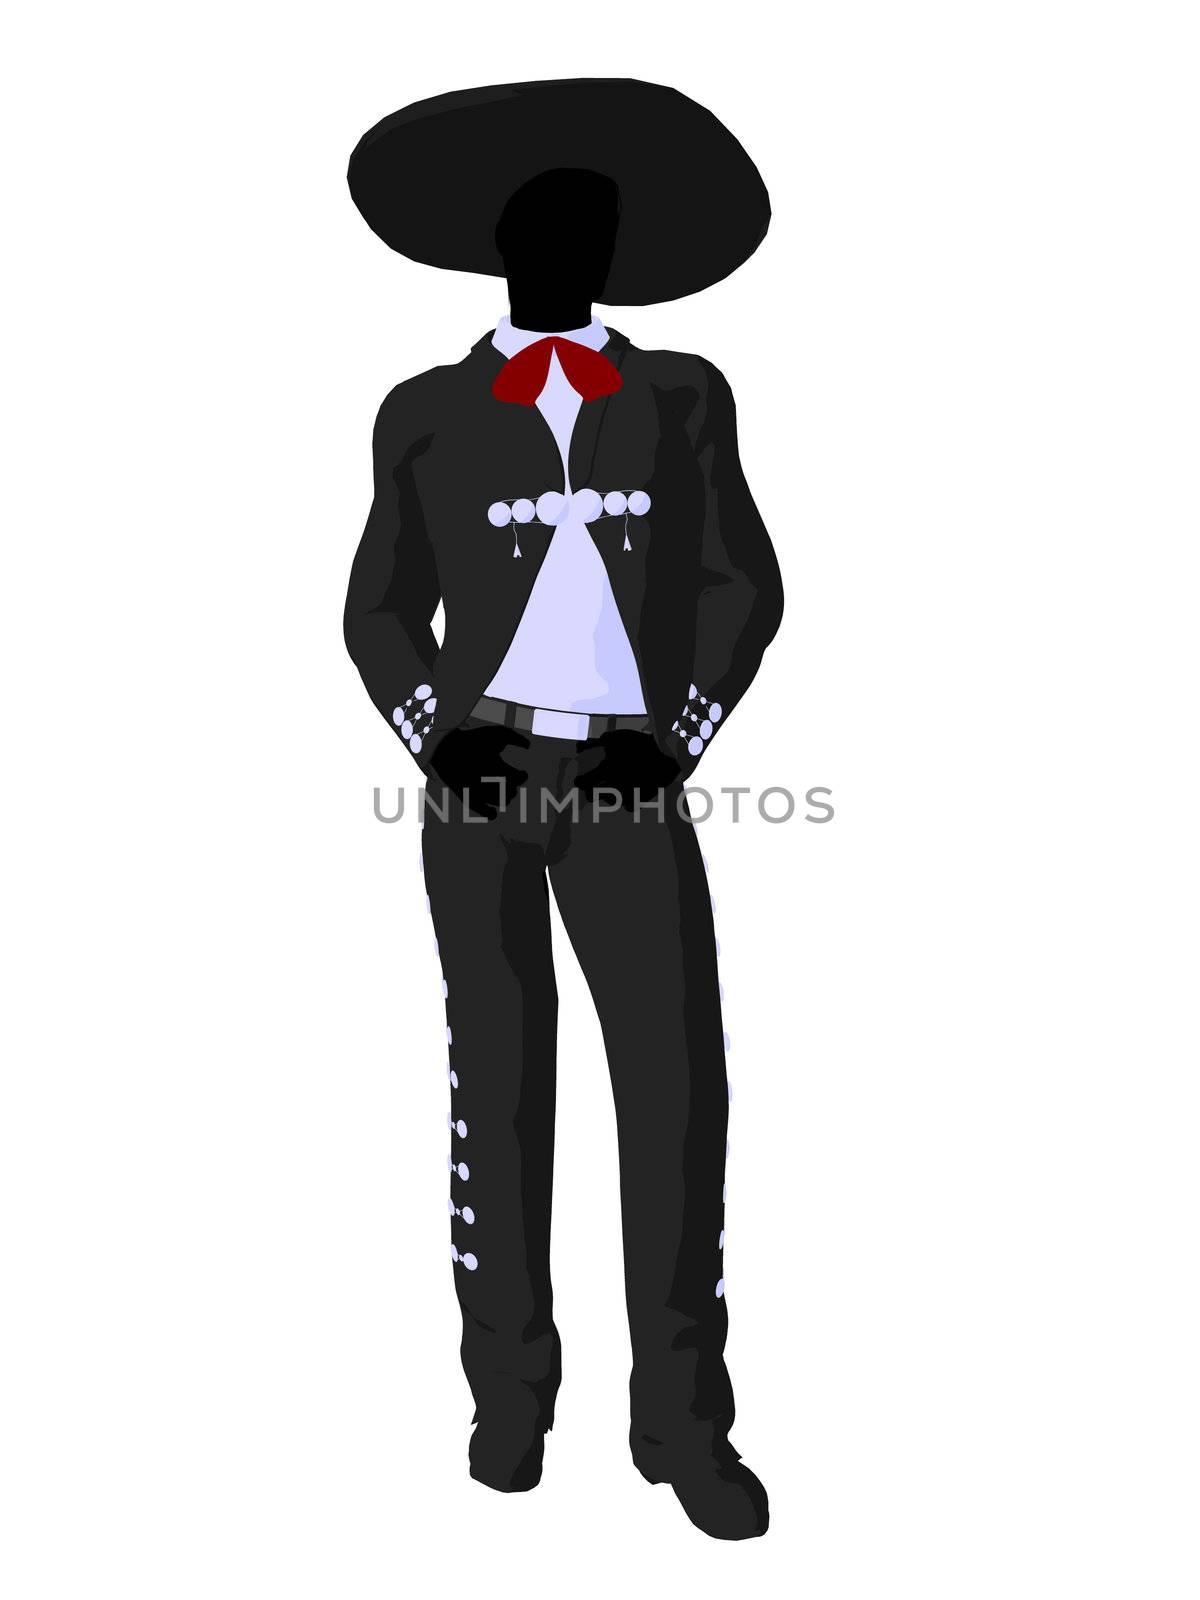 Male Mariachi Silhouette Illustration by kathygold